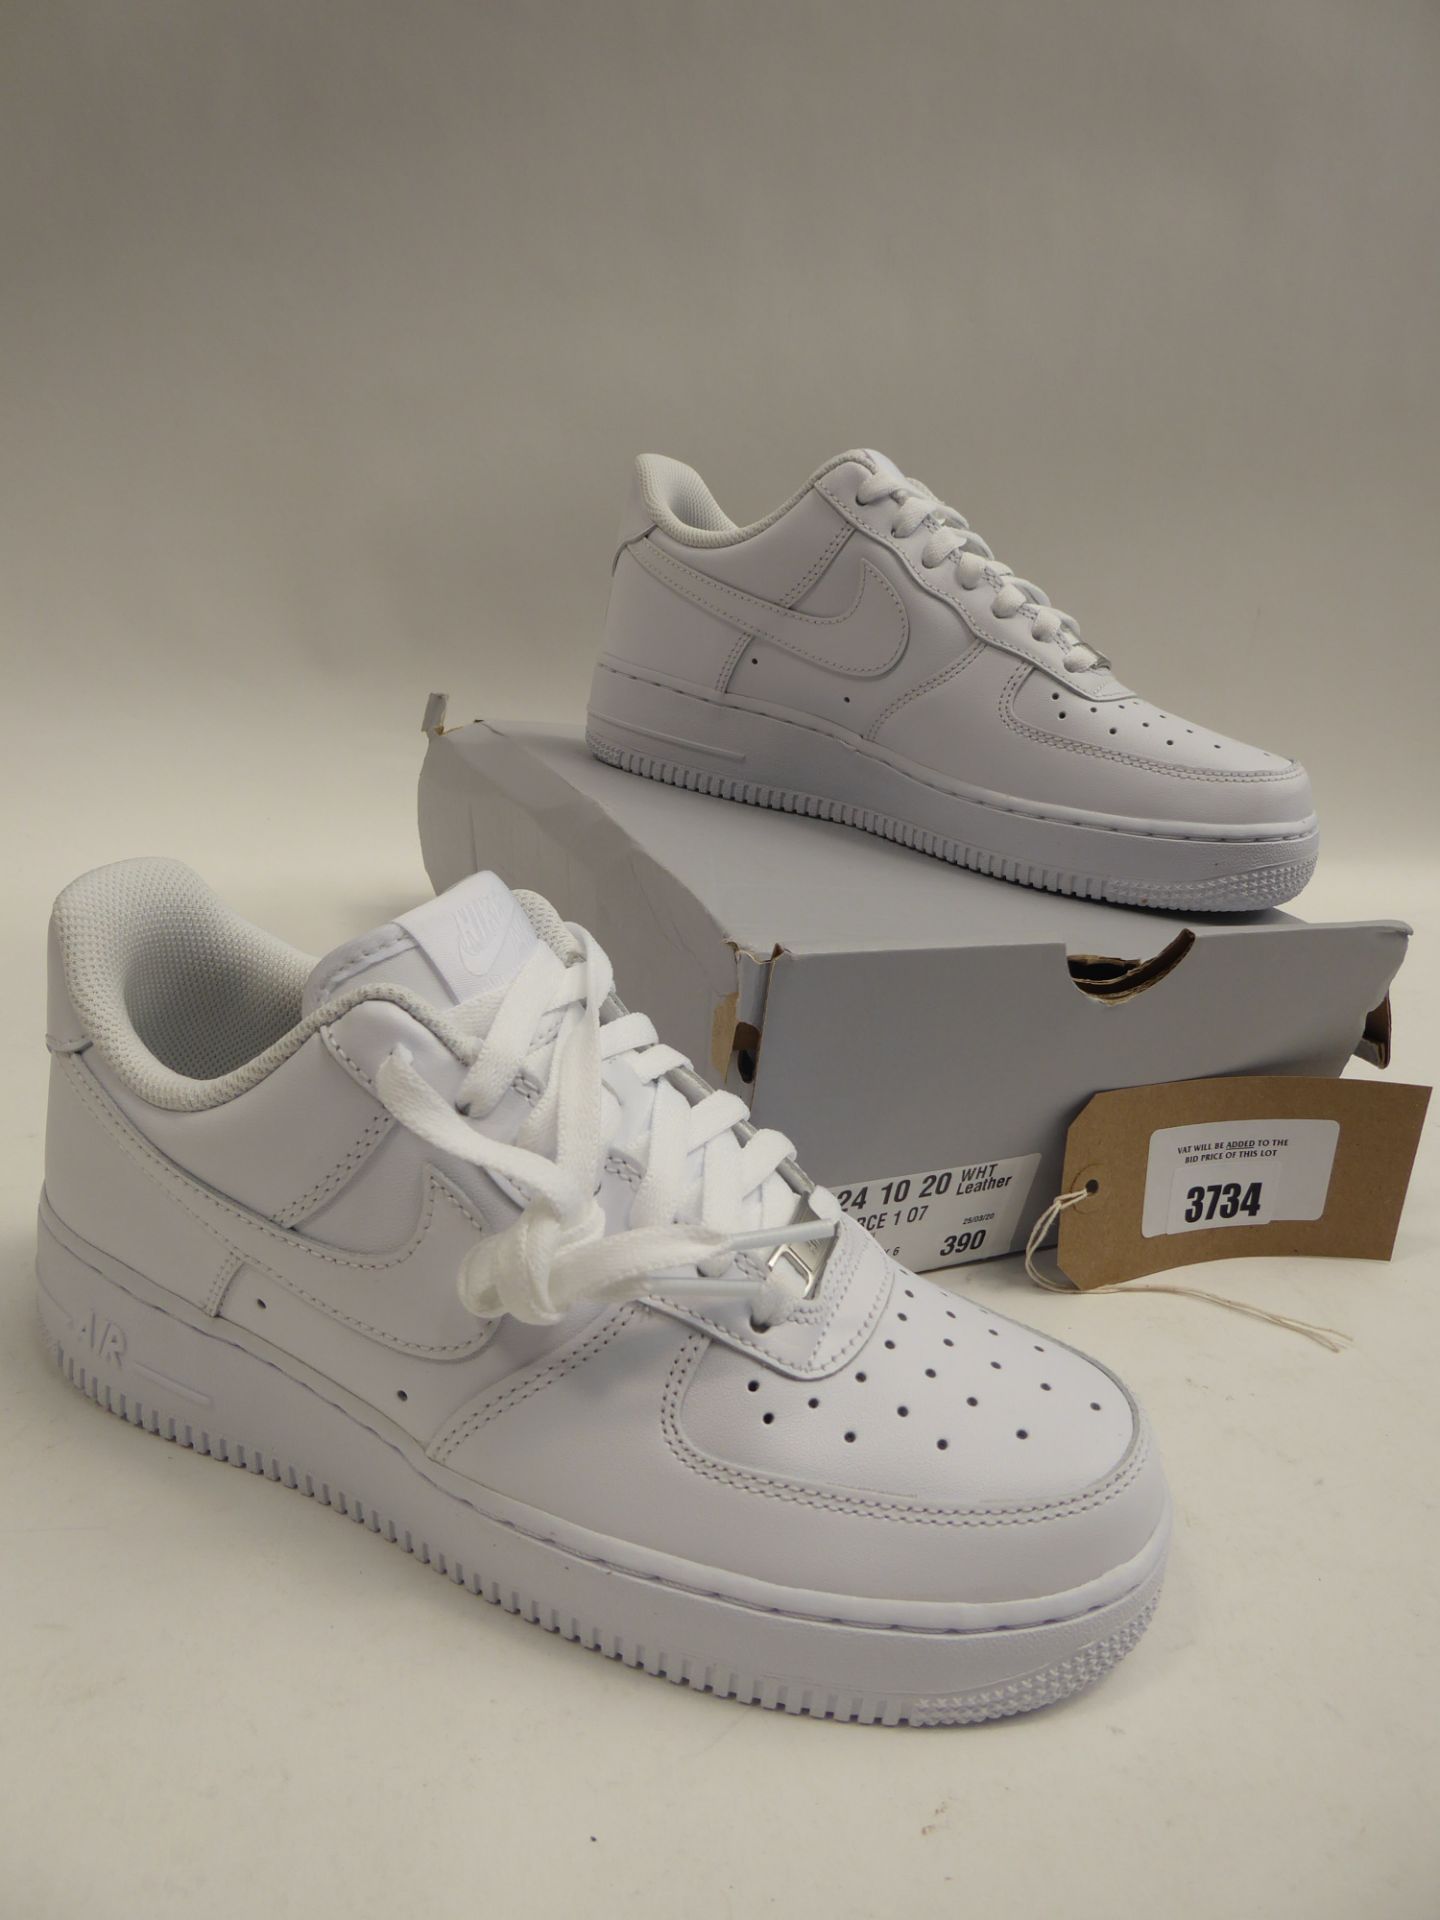 Nike Air Force 1 trainers size 6 - Image 2 of 2